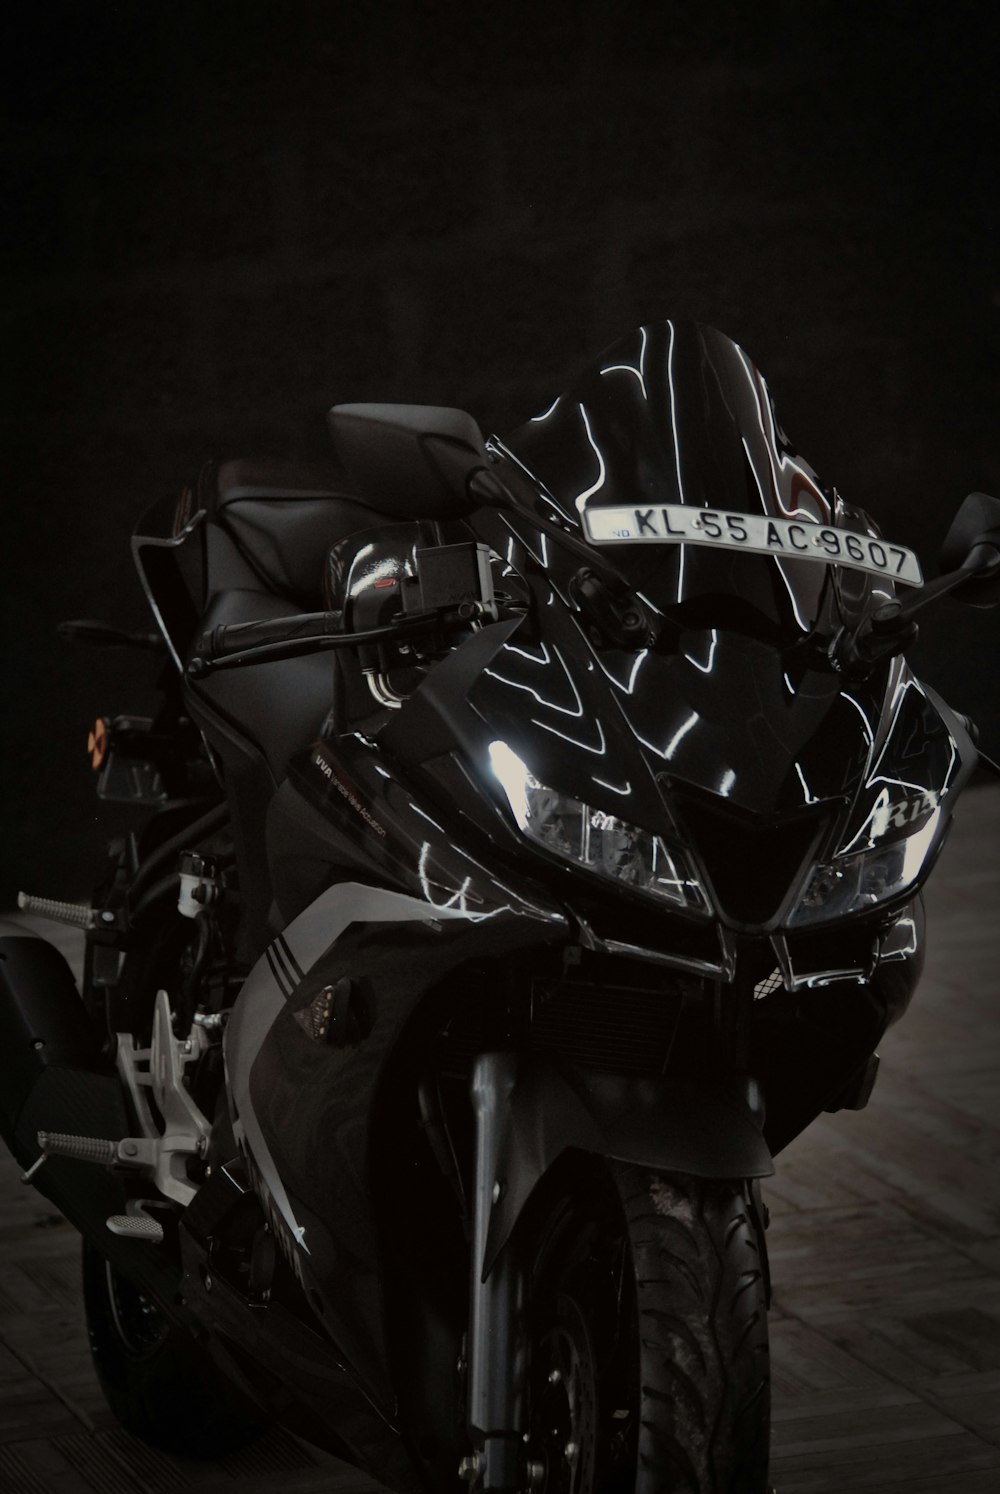 a black motorcycle parked in a dark room